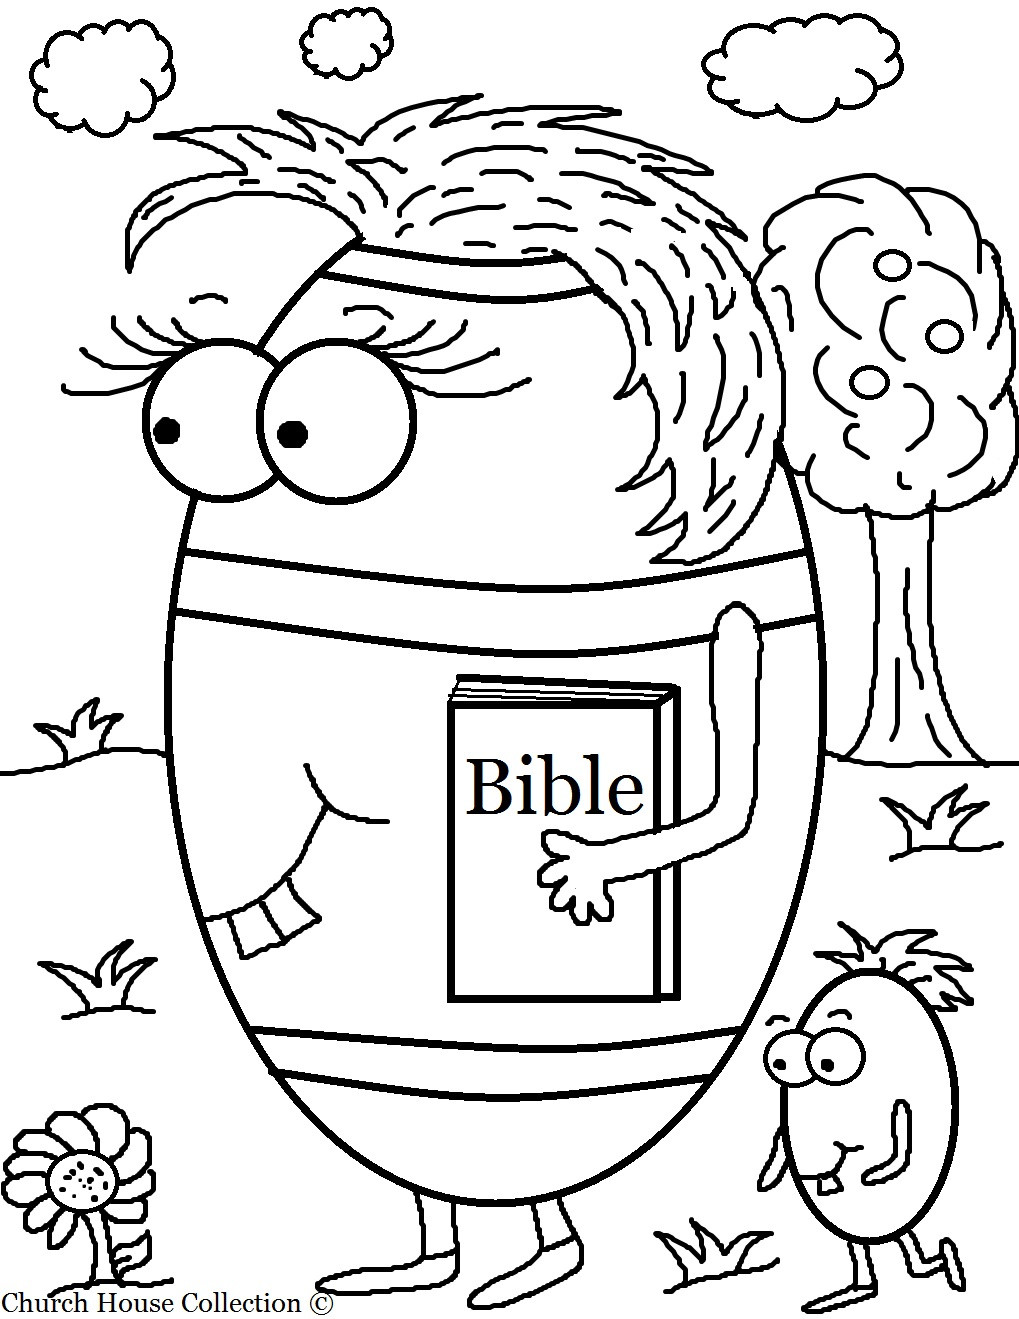 Bible Coloring Sheets For Kids
 Church House Collection Blog Free Easter Egg Carrying Her